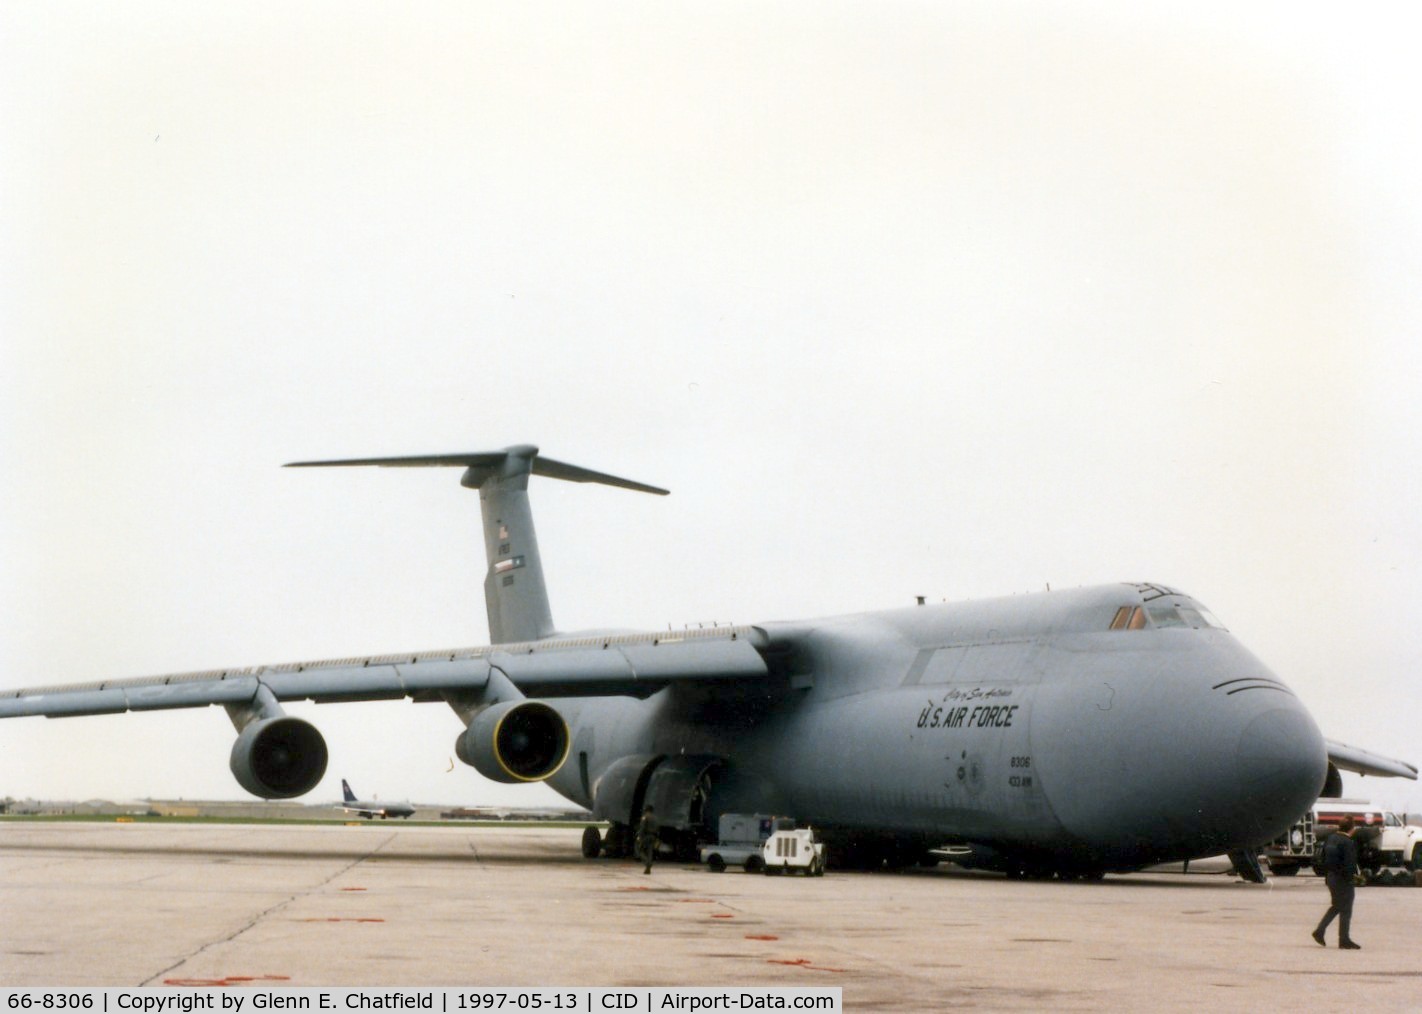 66-8306, 1966 Lockheed C-5A Galaxy C/N 500-0004, C-5A at the base of the control tower